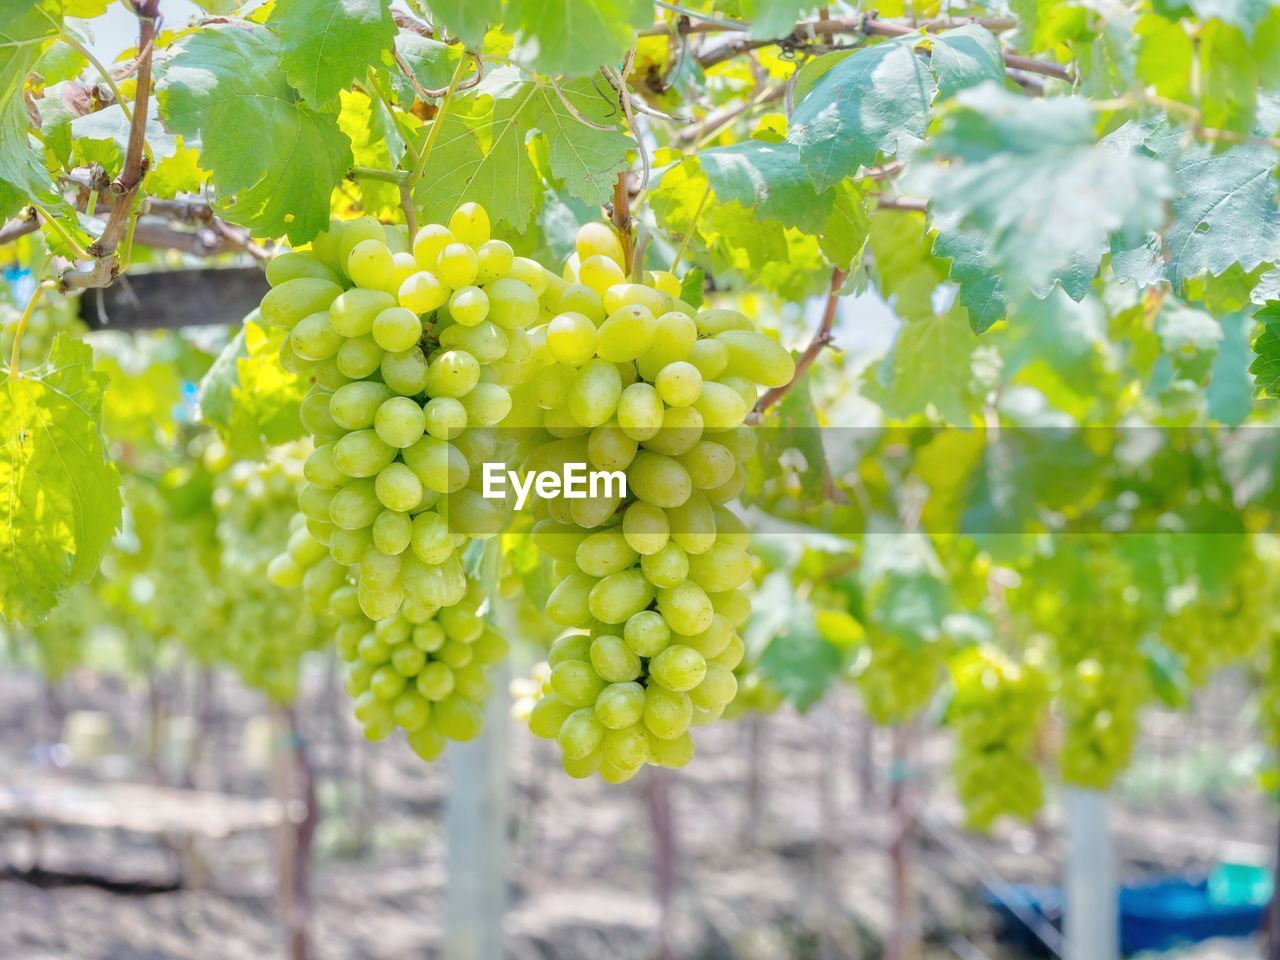 CLOSE-UP OF GRAPES GROWING ON VINE